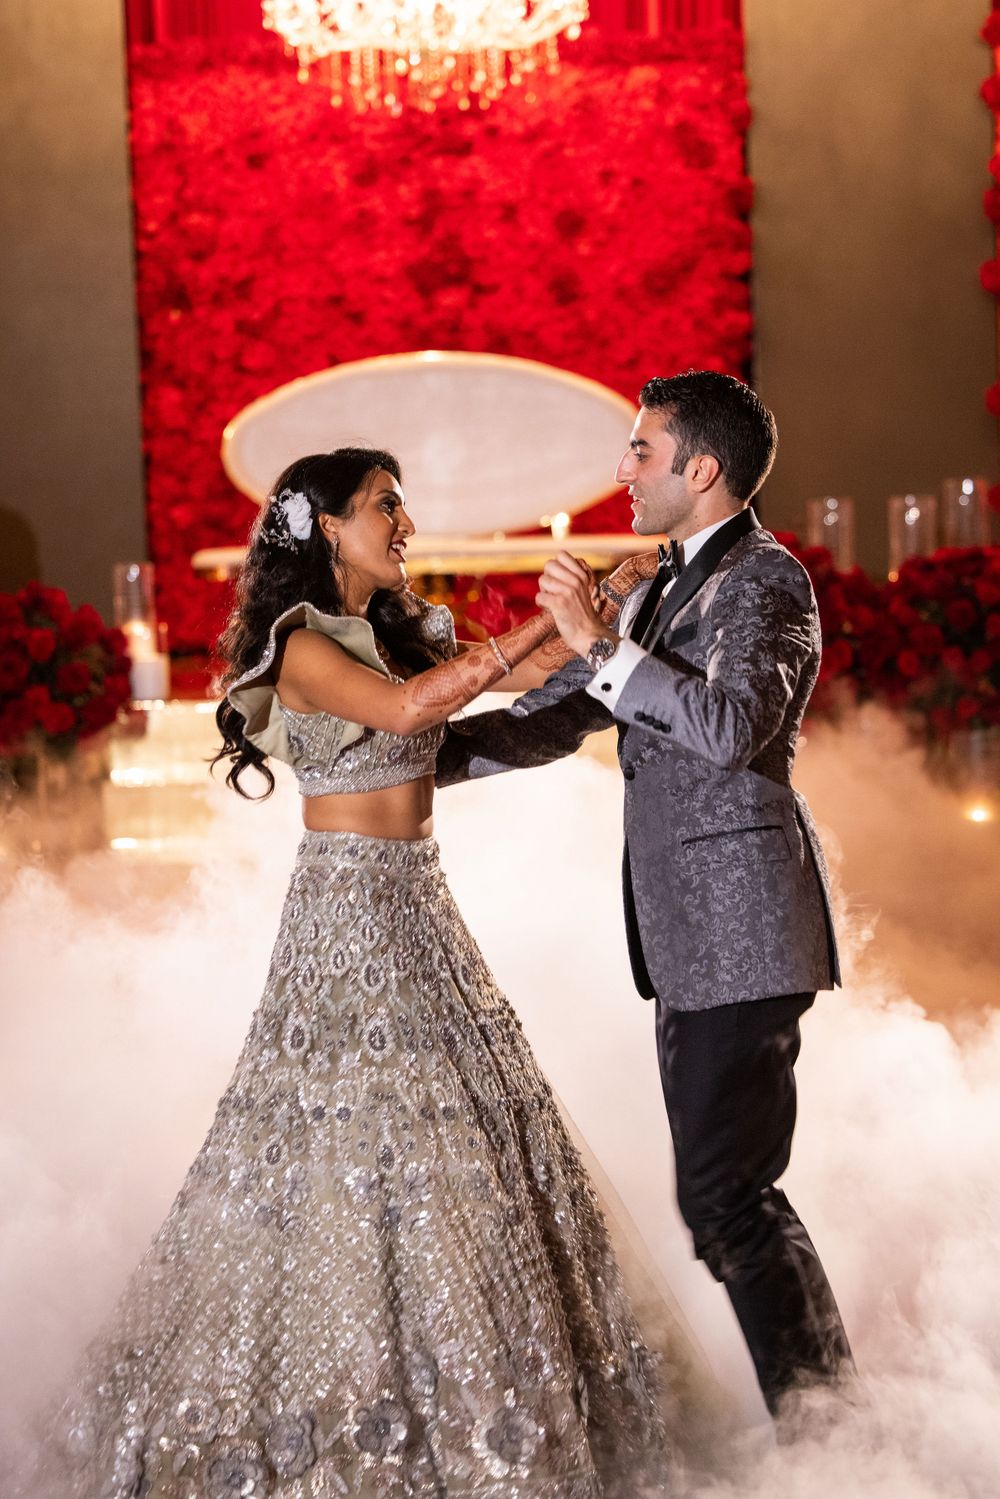 Photo of romantic first dance shot by couple on sangeet or reception